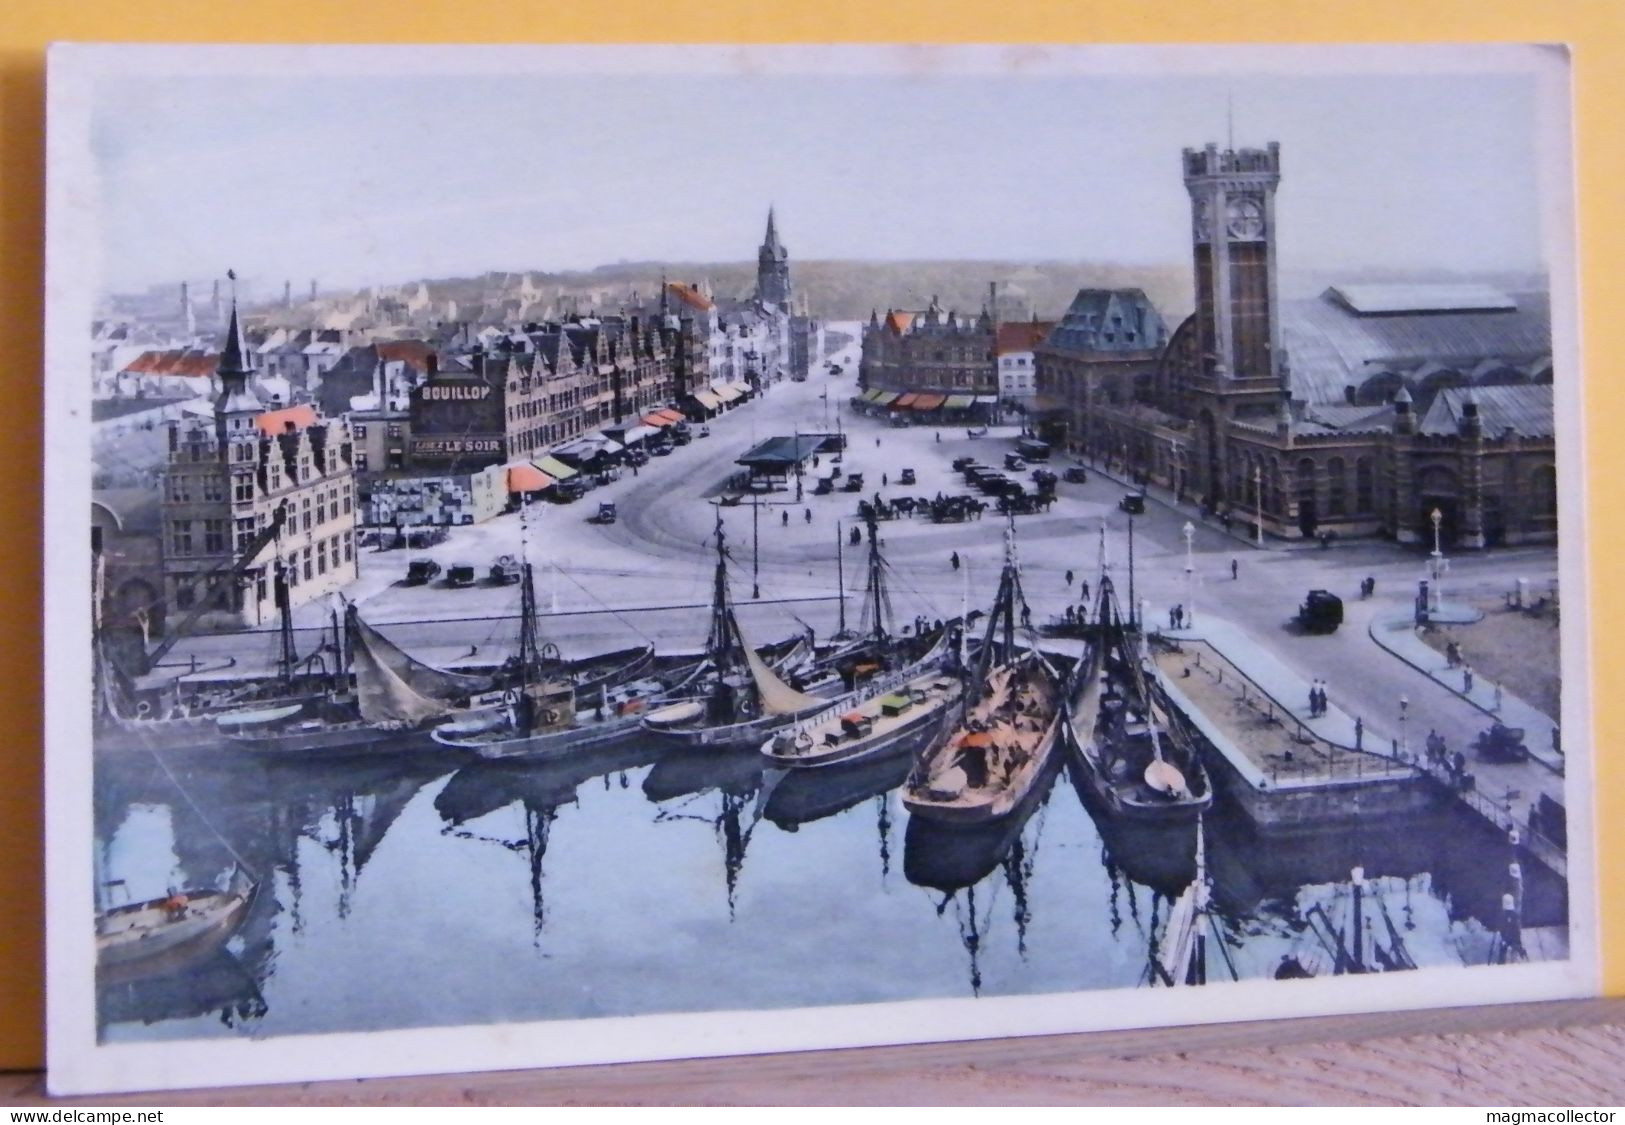 (OS/2) OSTENDE - OOSTENDE - OSTEND PLACE/ PLATS/ SQUARE ERNEST FEYS - NON VIAGGIATA - Oostende